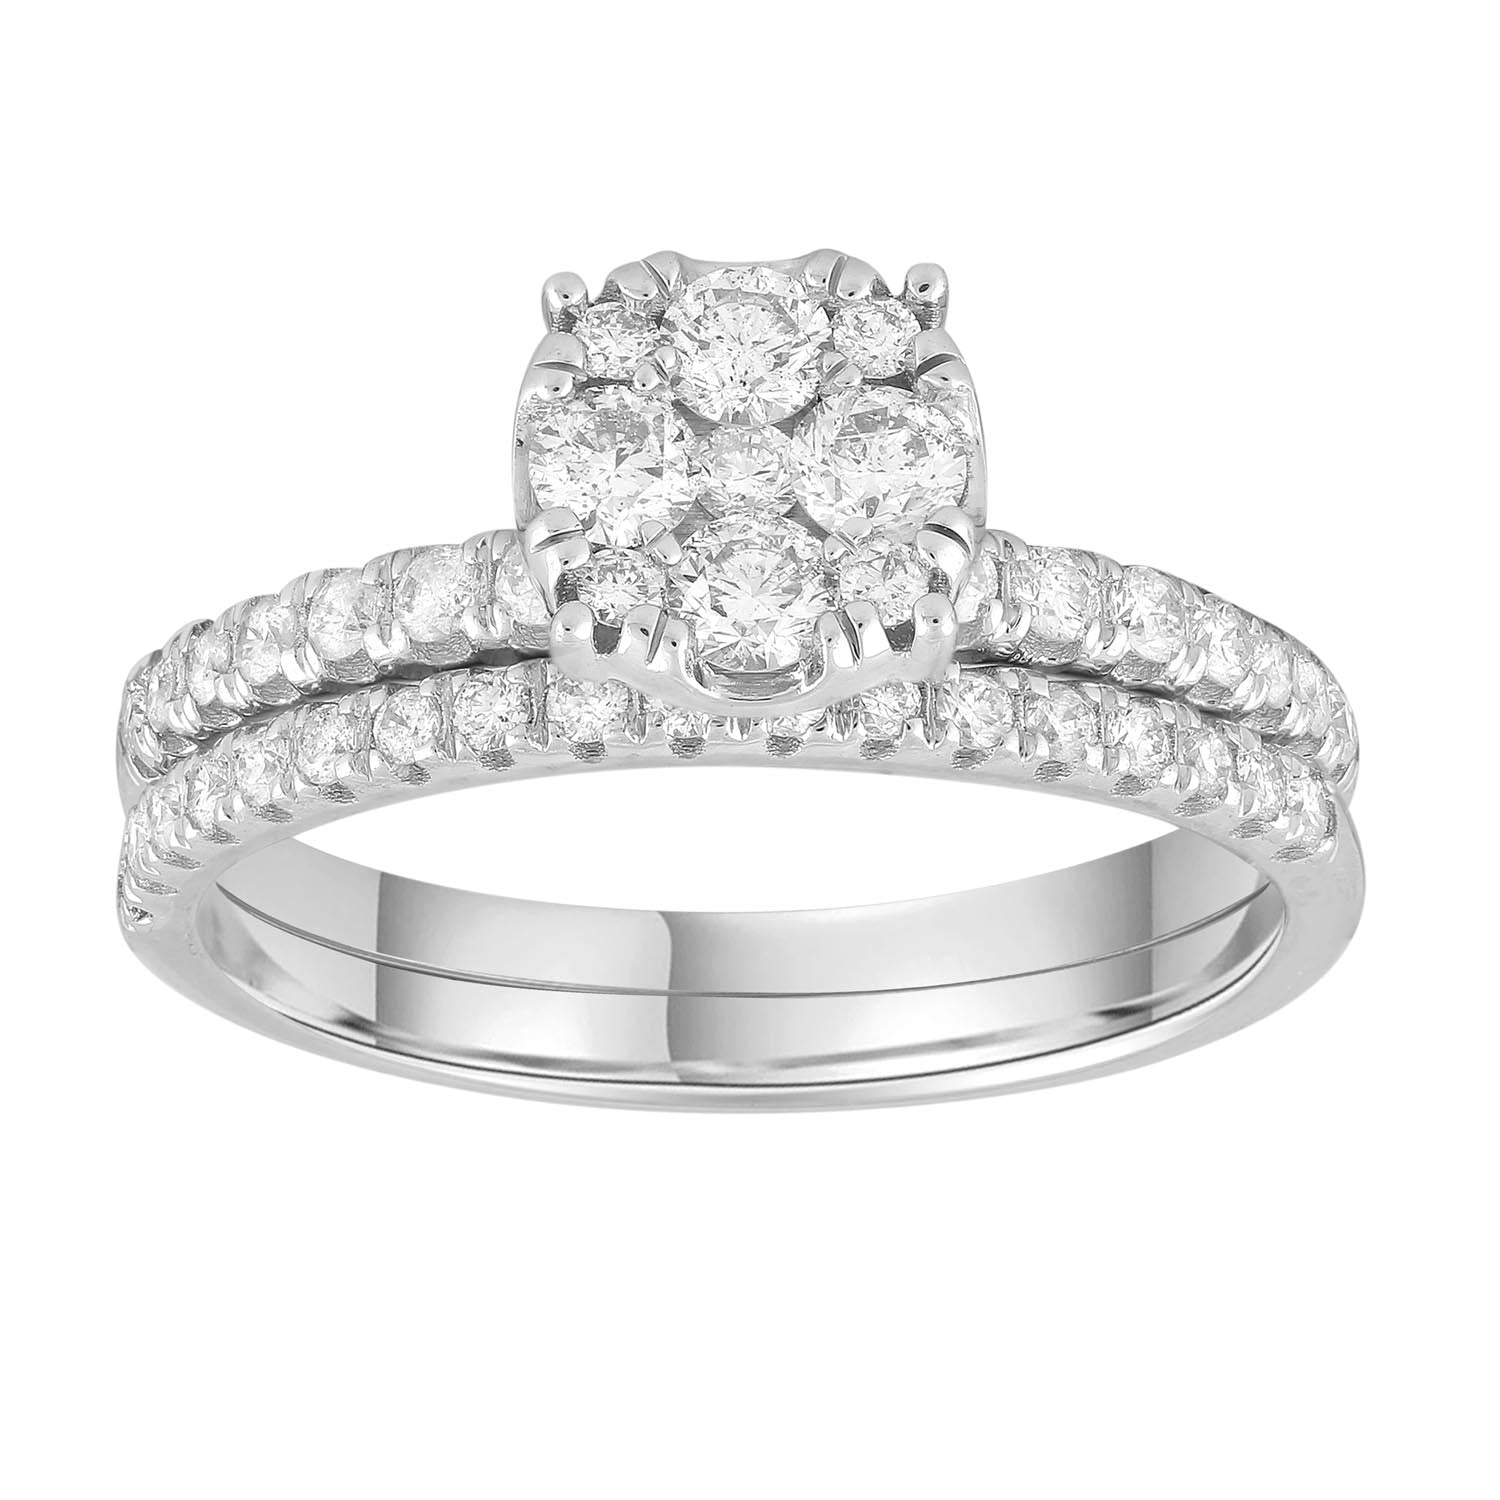 Engagement & Wedding Ring Set with 0.73ct Diamonds in 9K White Gold